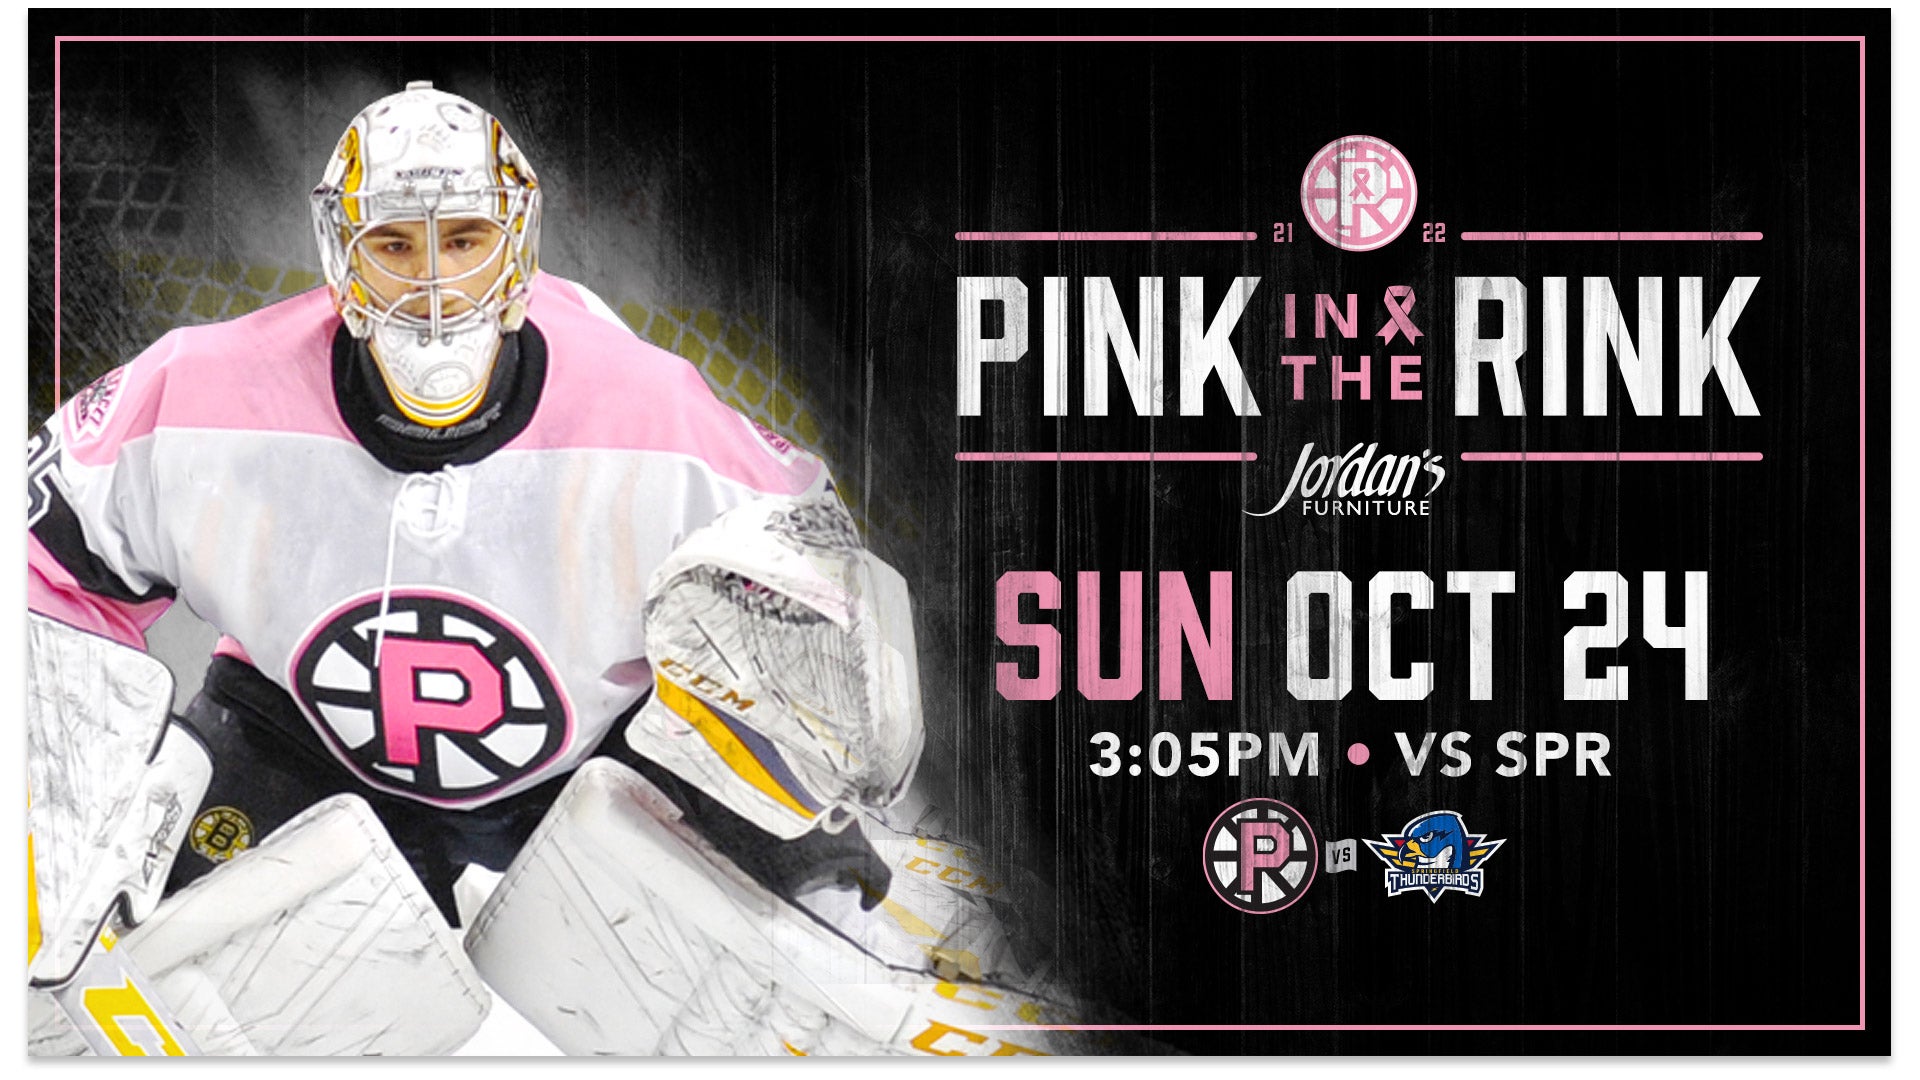 The Providence Bruins Pink in the Rink - Providence Bruins